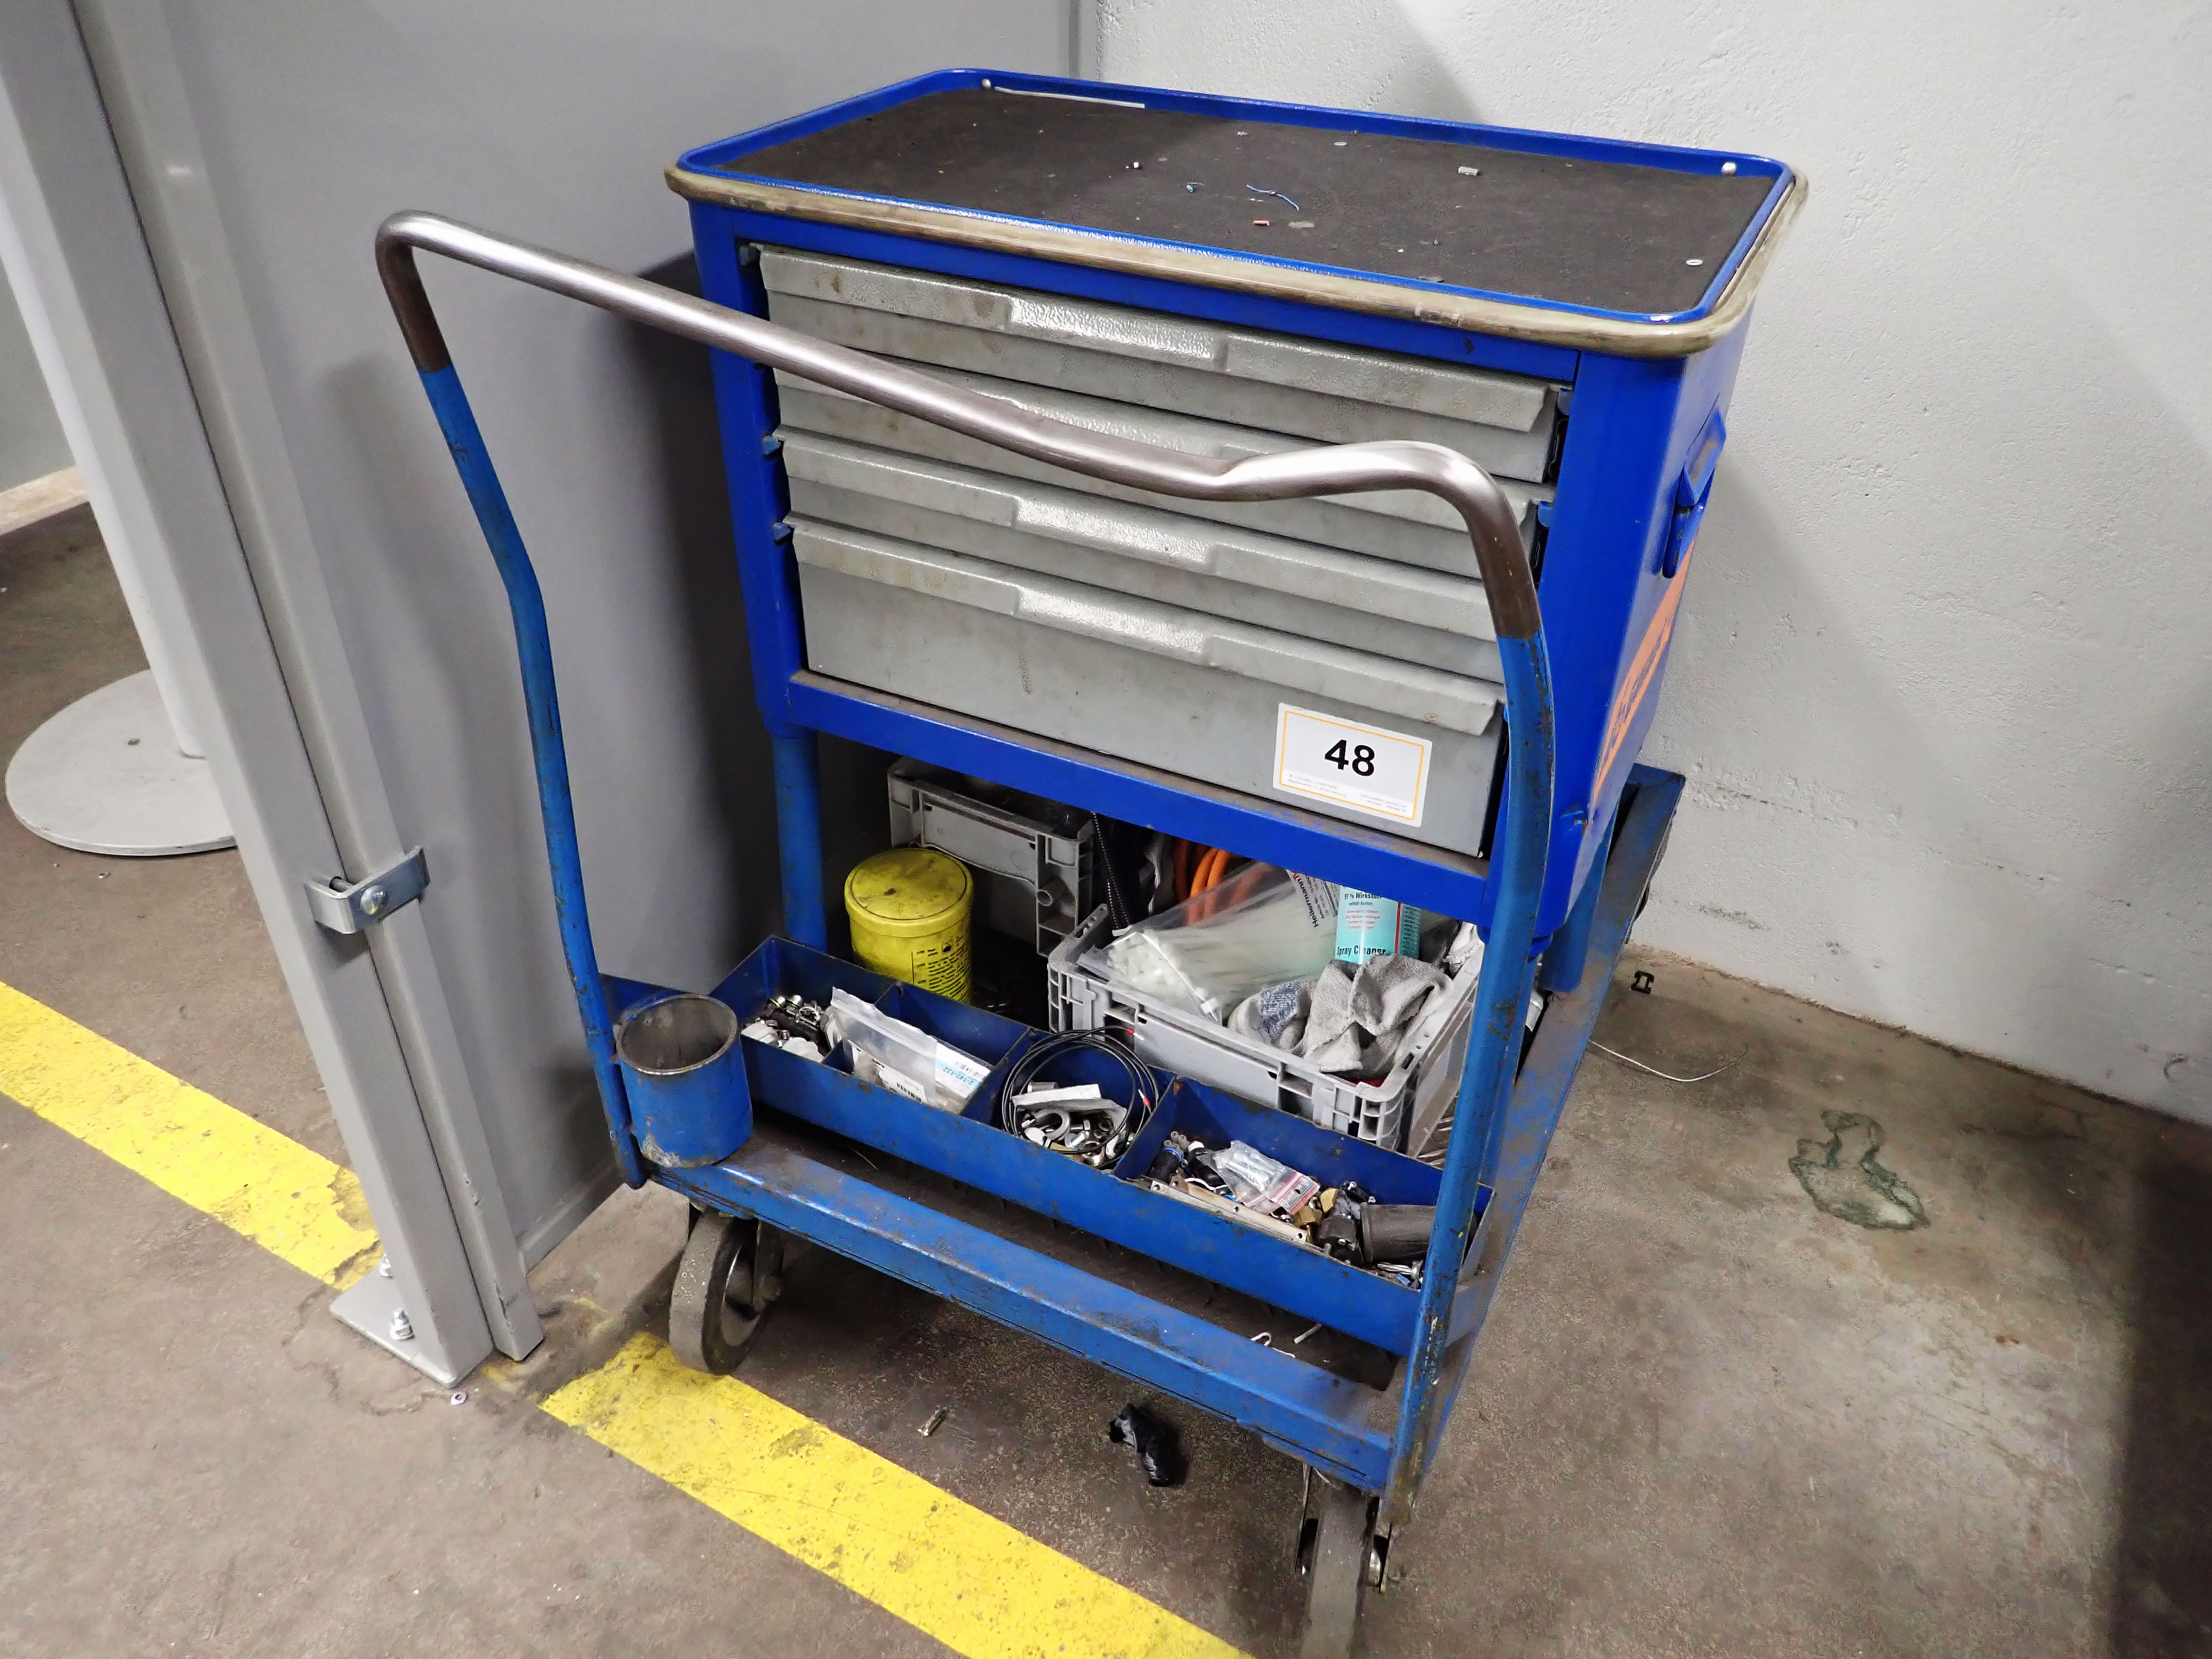 Pos.  48:  Werkzeugschubladencontainer – Lot  48:  Tool drawer container